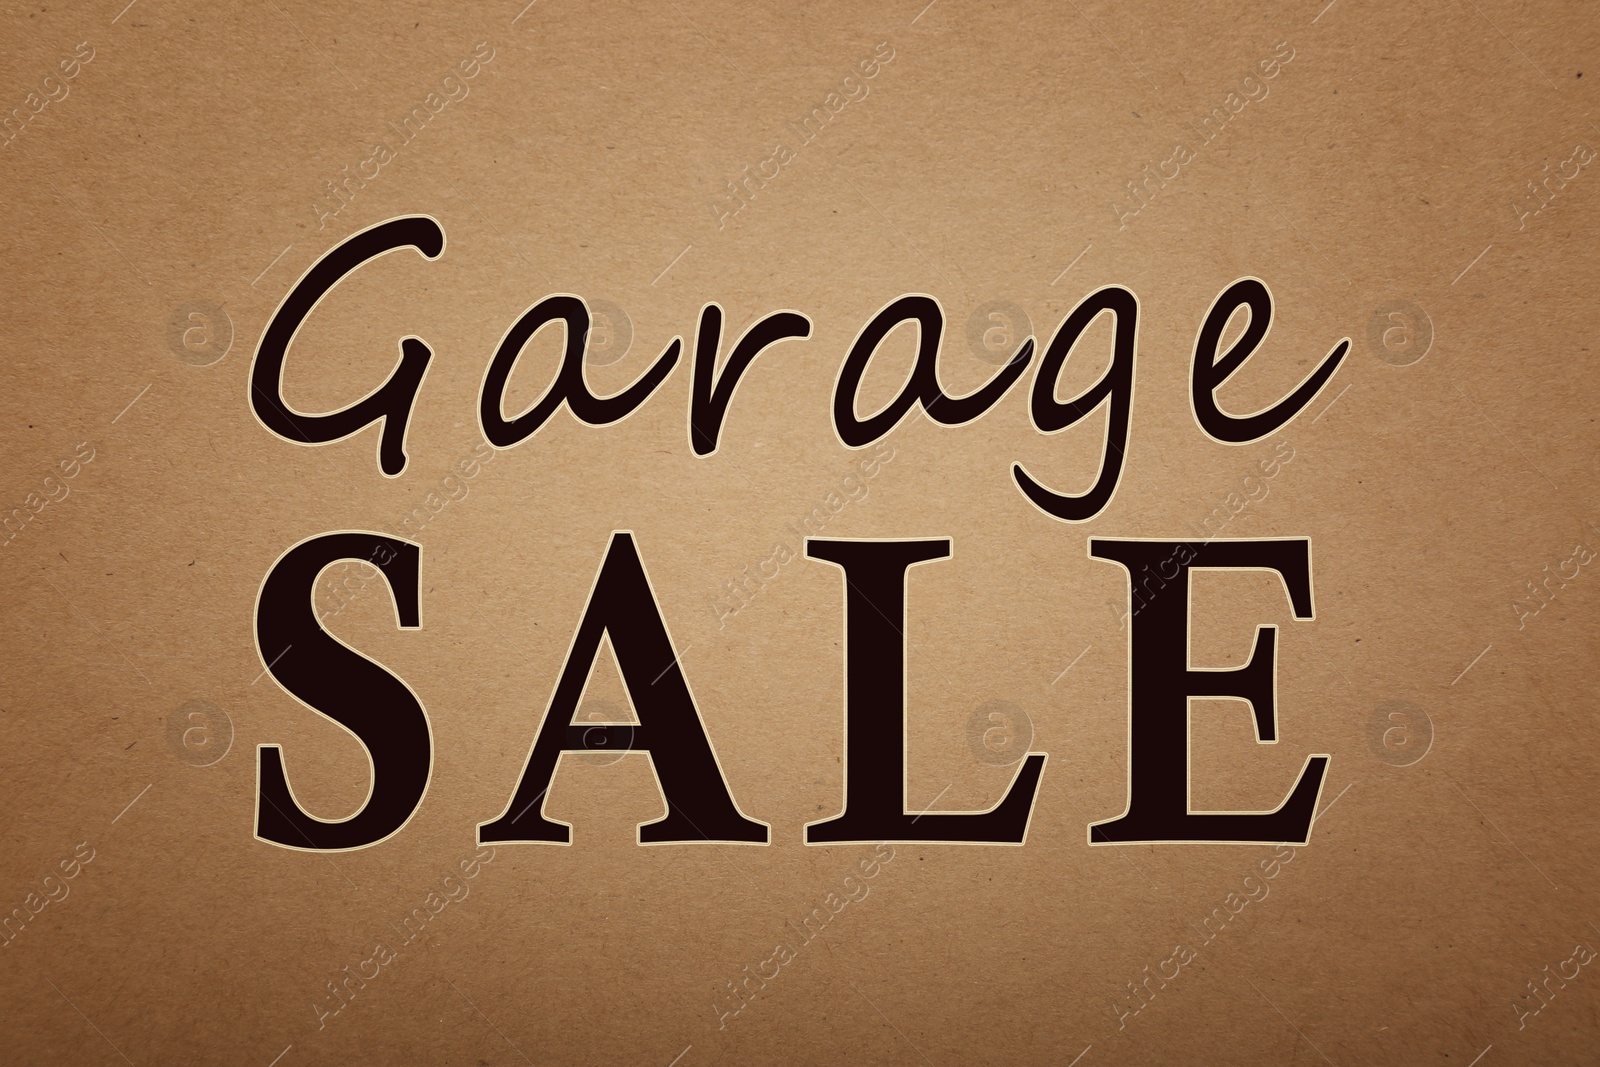 Image of Words Garage Sale on brown paper, top view